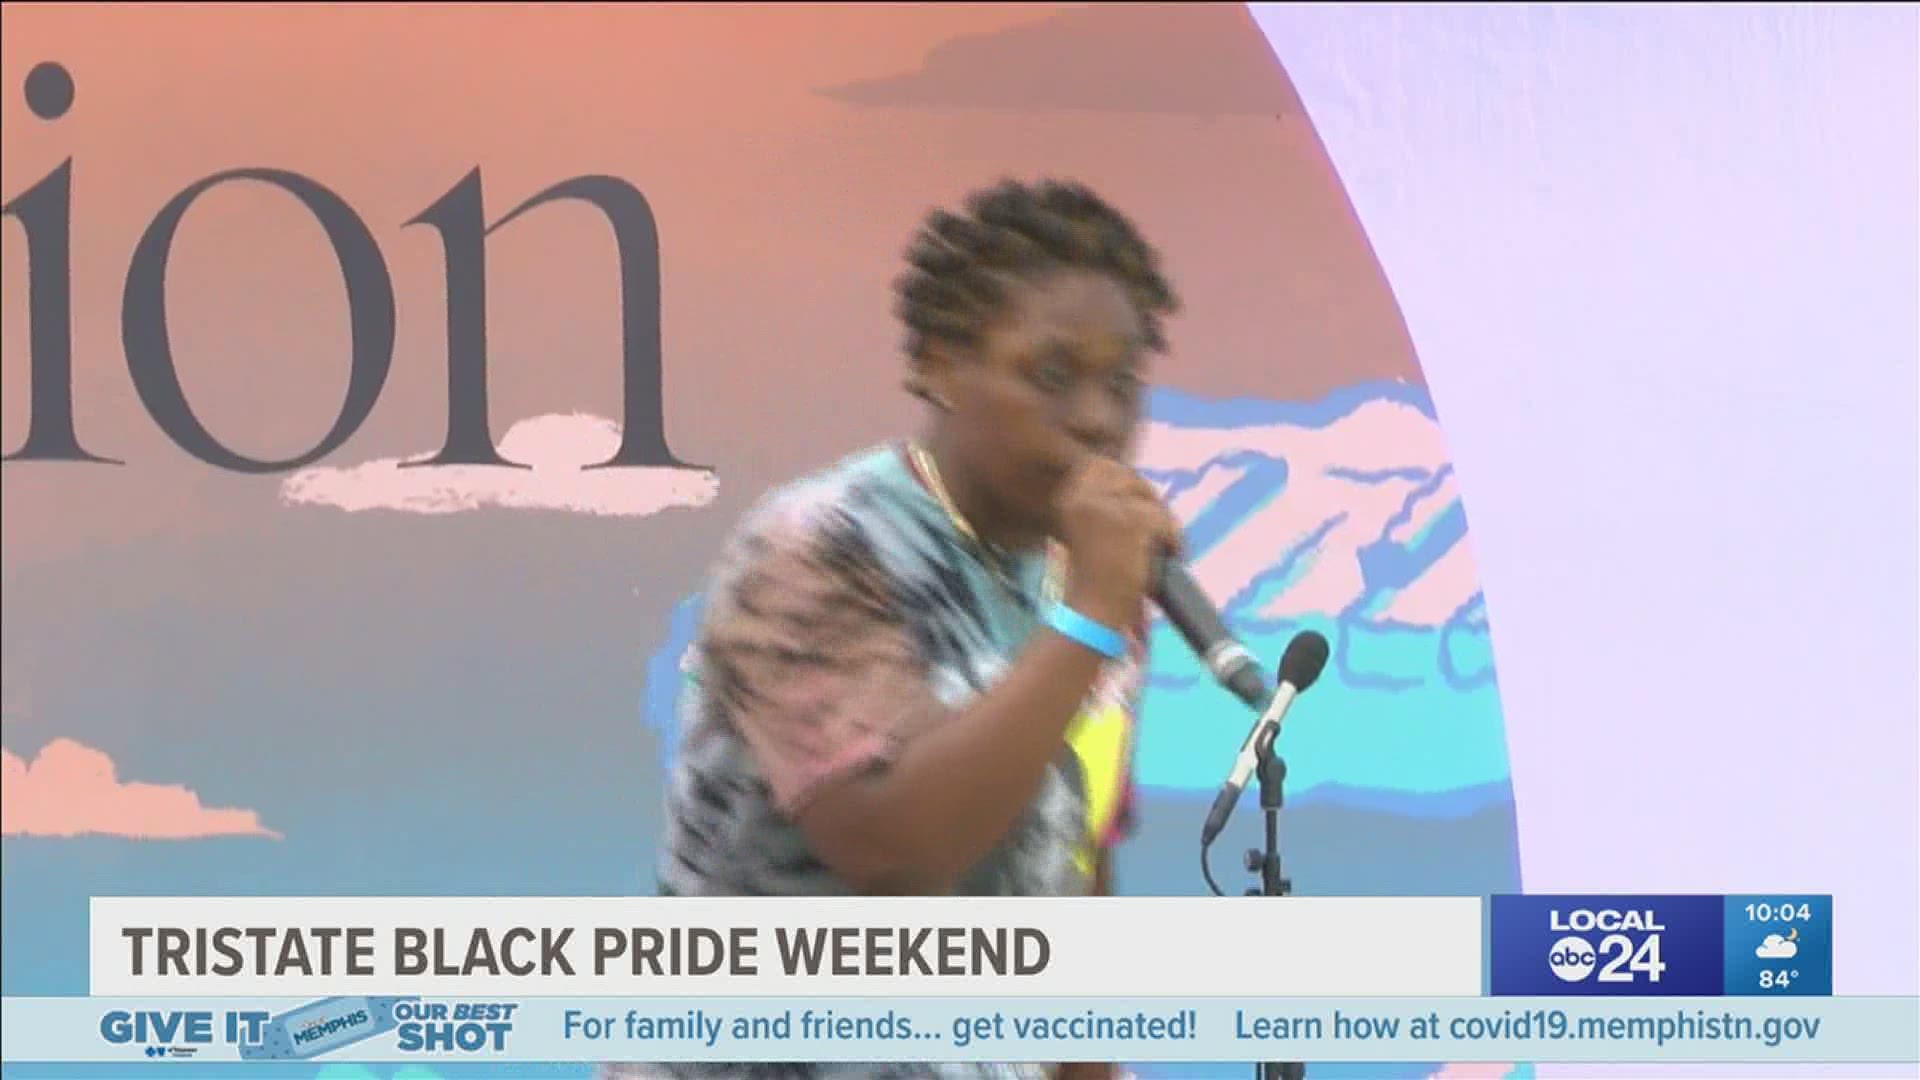 Tri-State Black Pride is a four-day event that occurs every year during June, which is the official observance of Pride Month around the world.